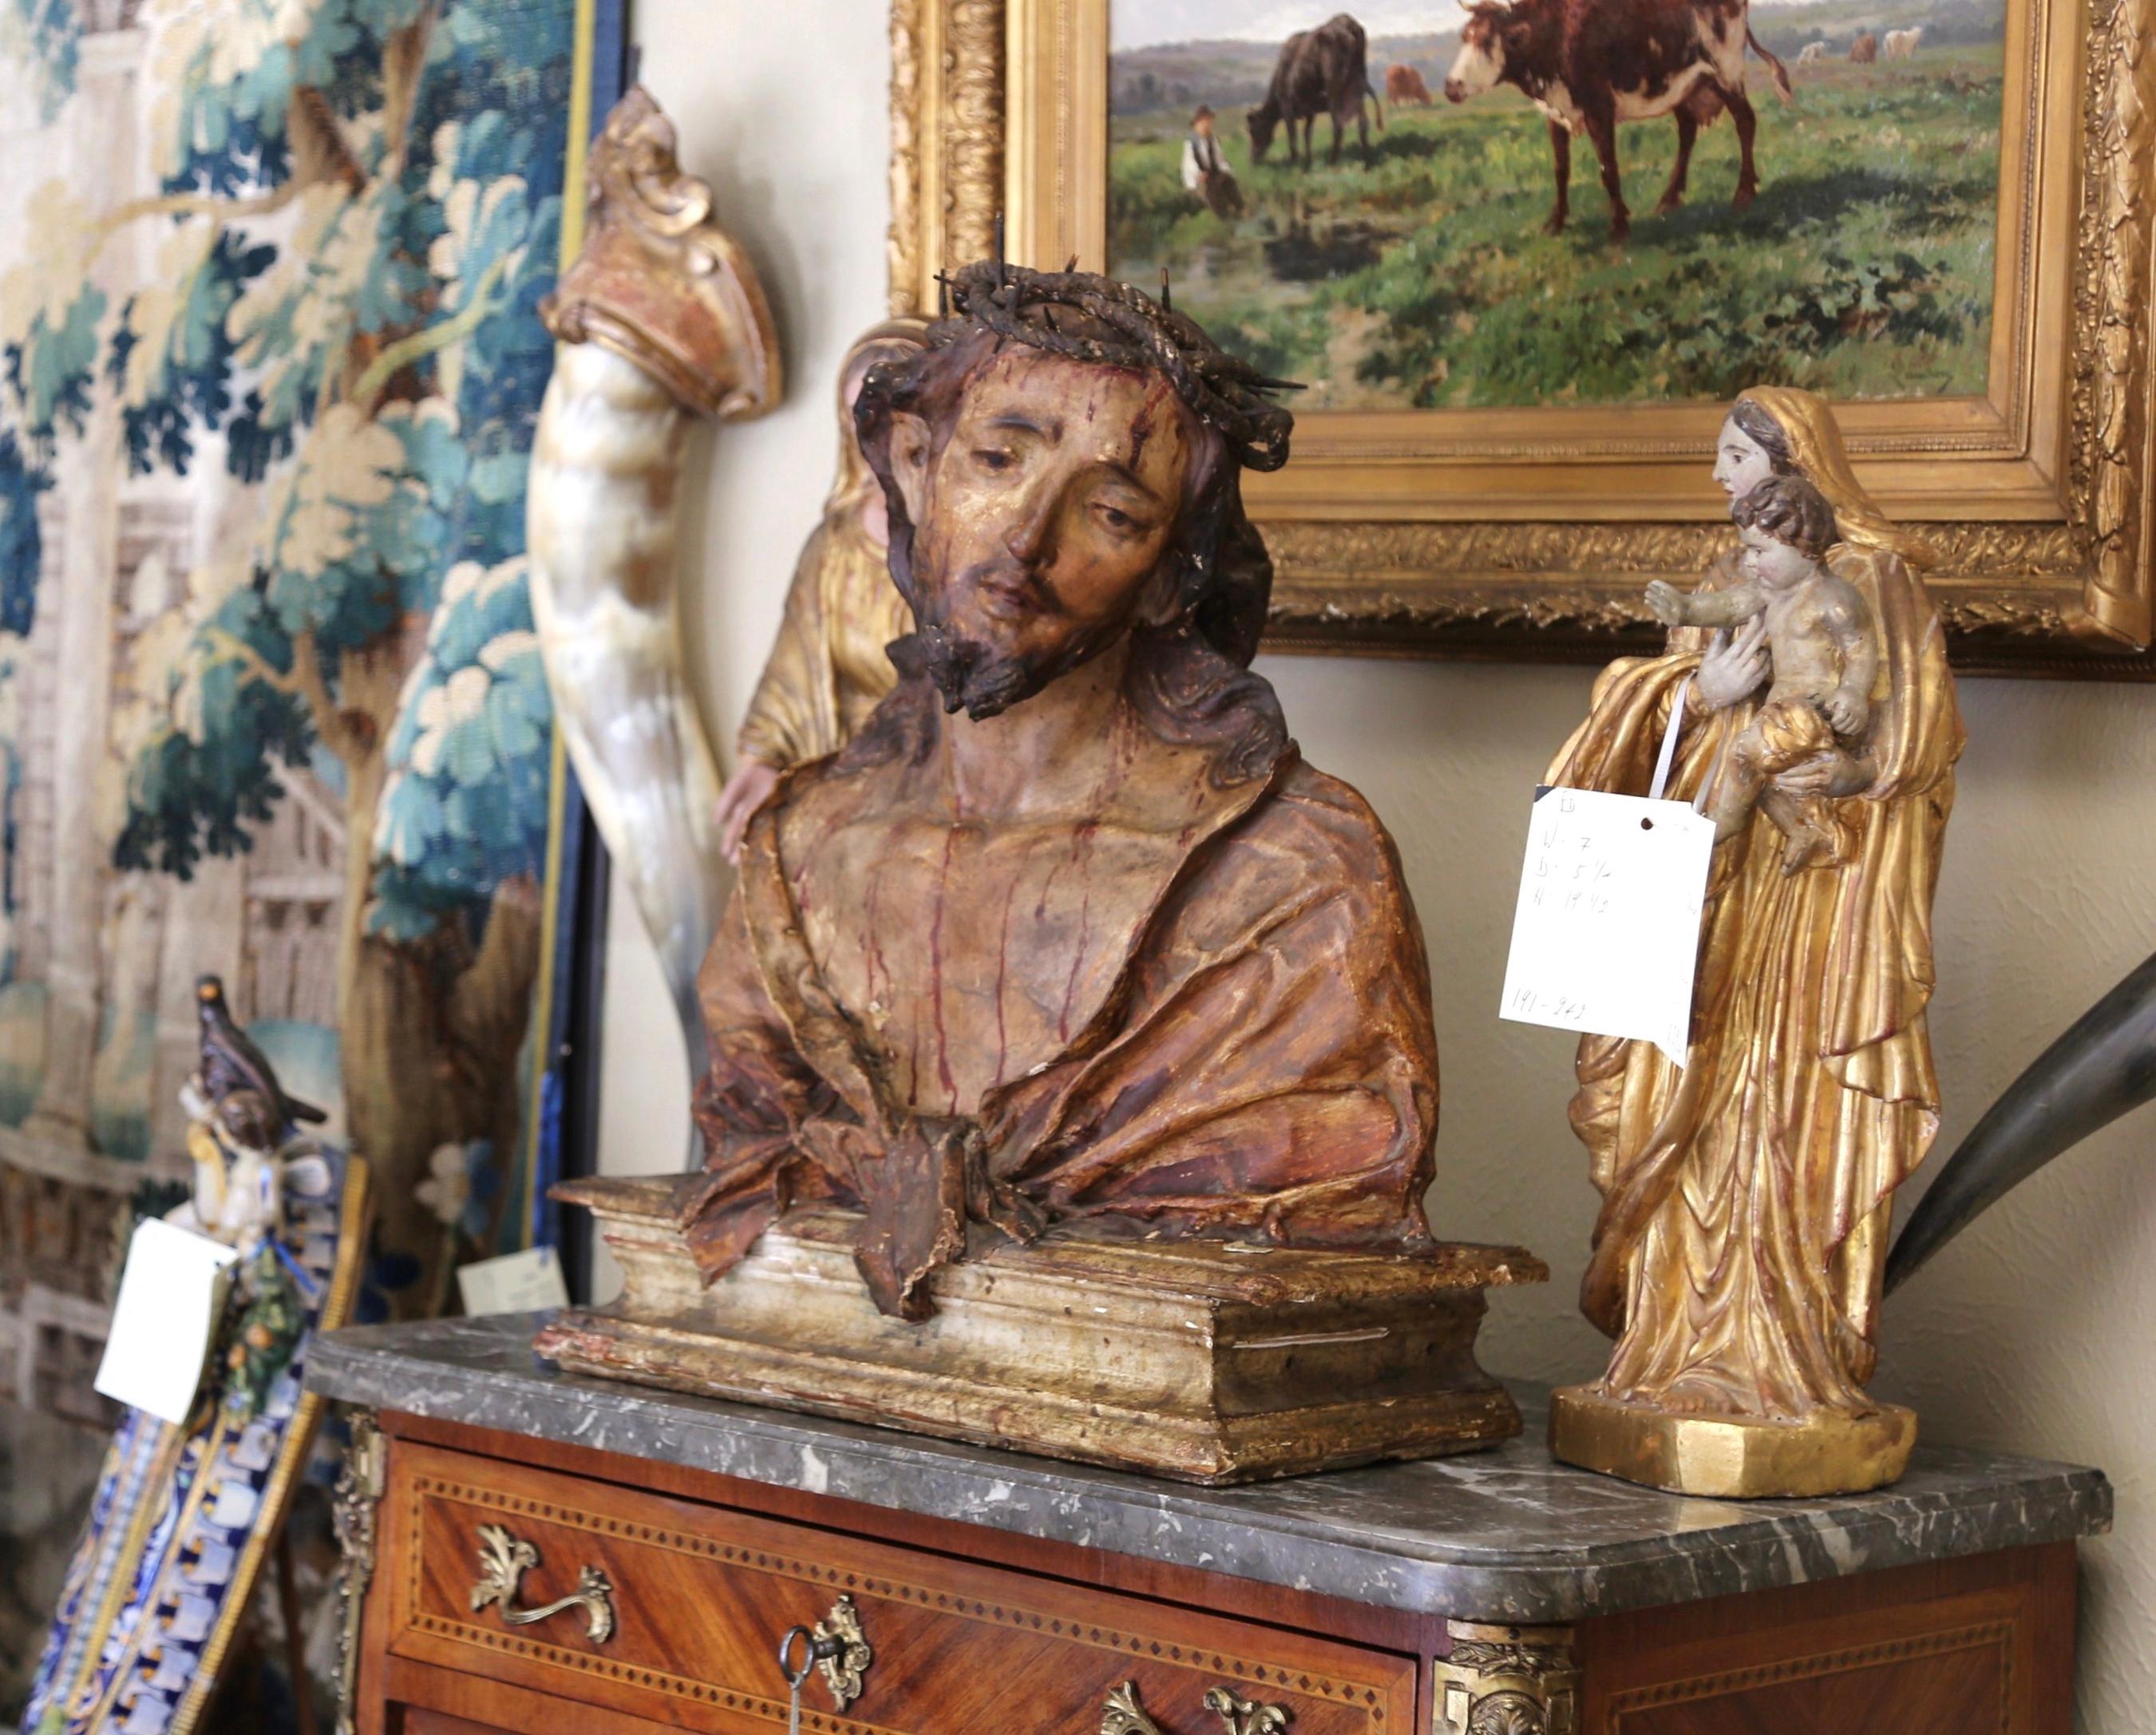 Crafted in Naples, Italy circa 1760, the carved wood and paper mâché sculpture depicts our Lord Jesus Christ on a rectangular base. The large bust shows Jesus during the crucifixion dressed with his robe, the crown of thorns on his heads and drops